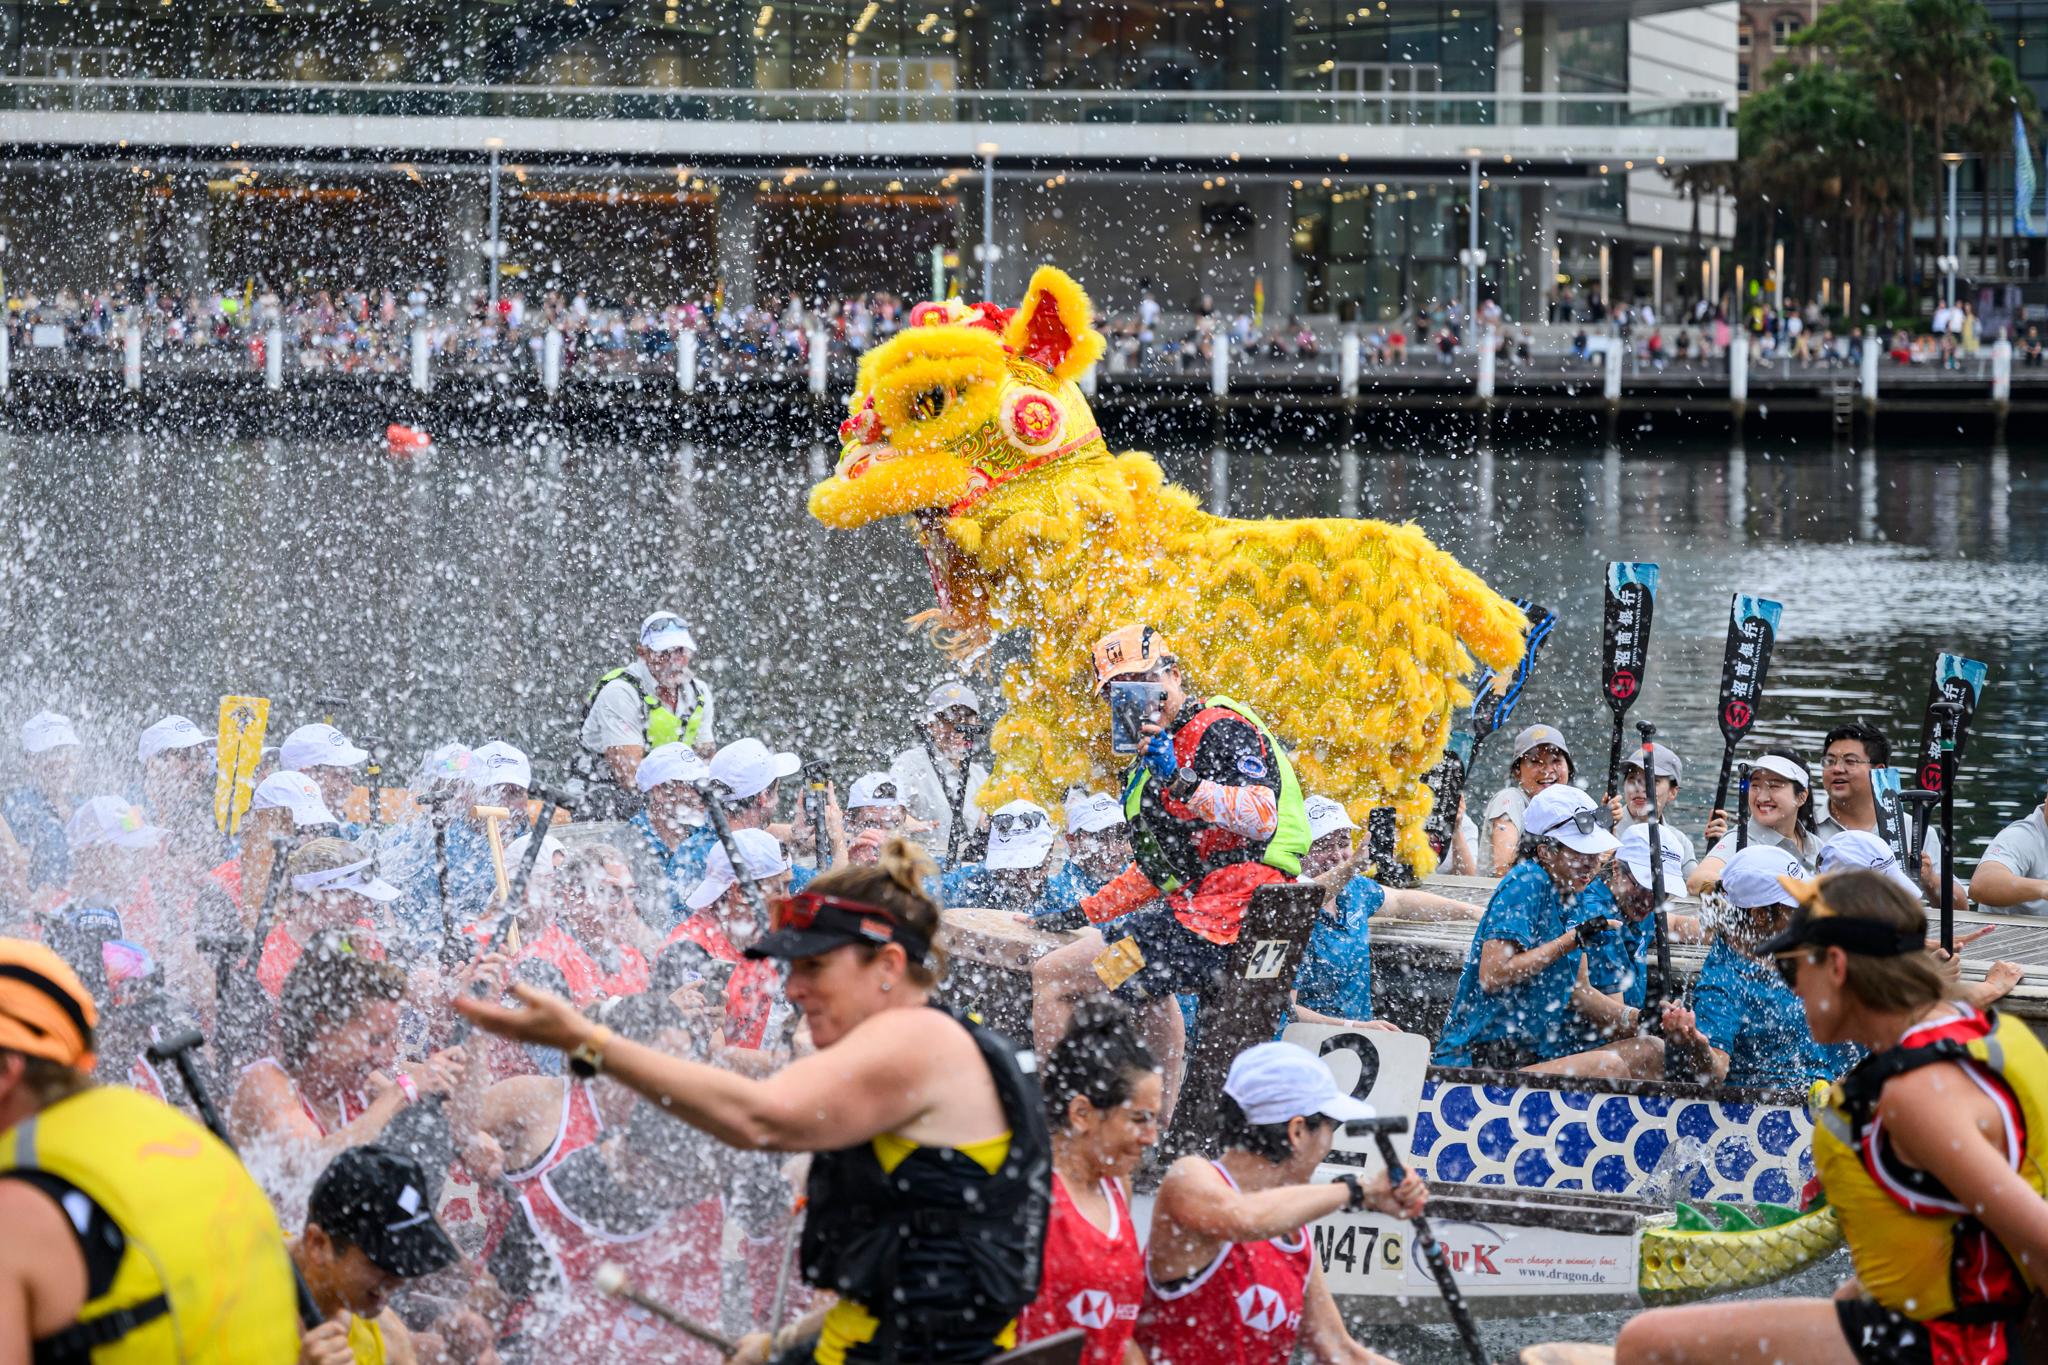 The Hong Kong Economic and Trade Office, Sydney participated in the Sydney Lunar New Year Dragon Boat Festival held in Sydney, Australia, from February 16 to 18. Photo shows a lion dance performance at the opening ceremony on February 16.




